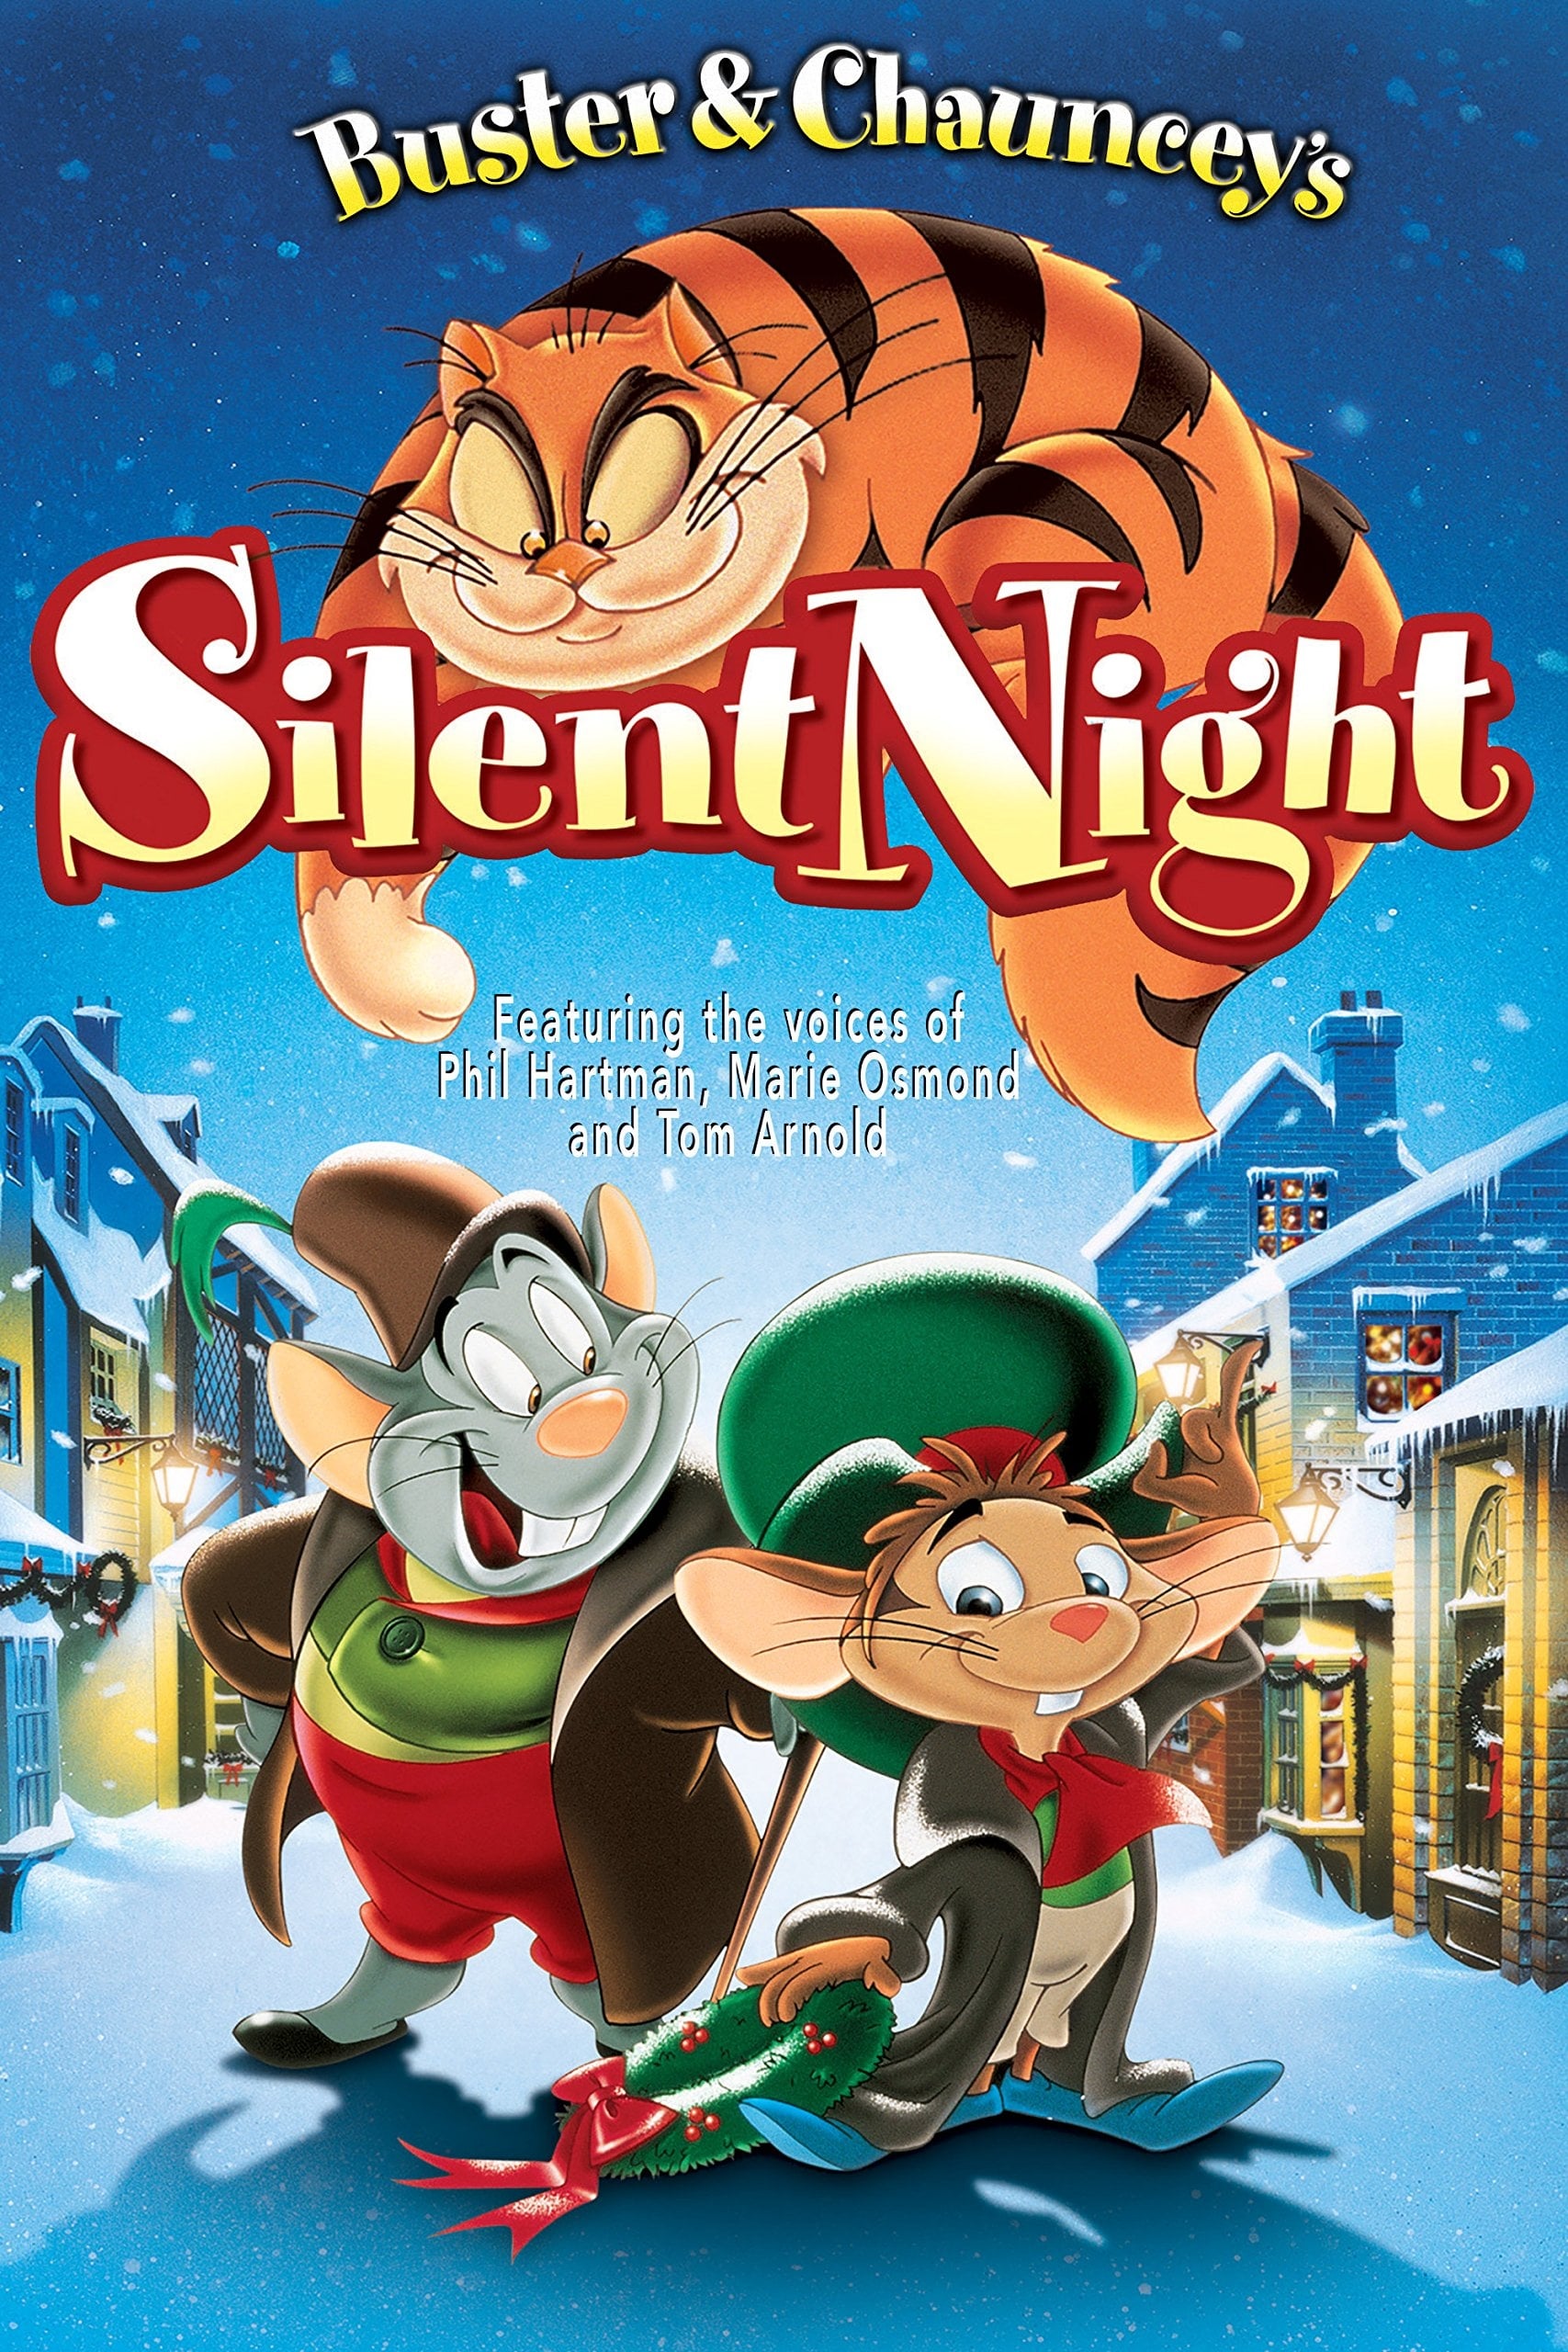 Buster & Chauncey's Silent Night streaming